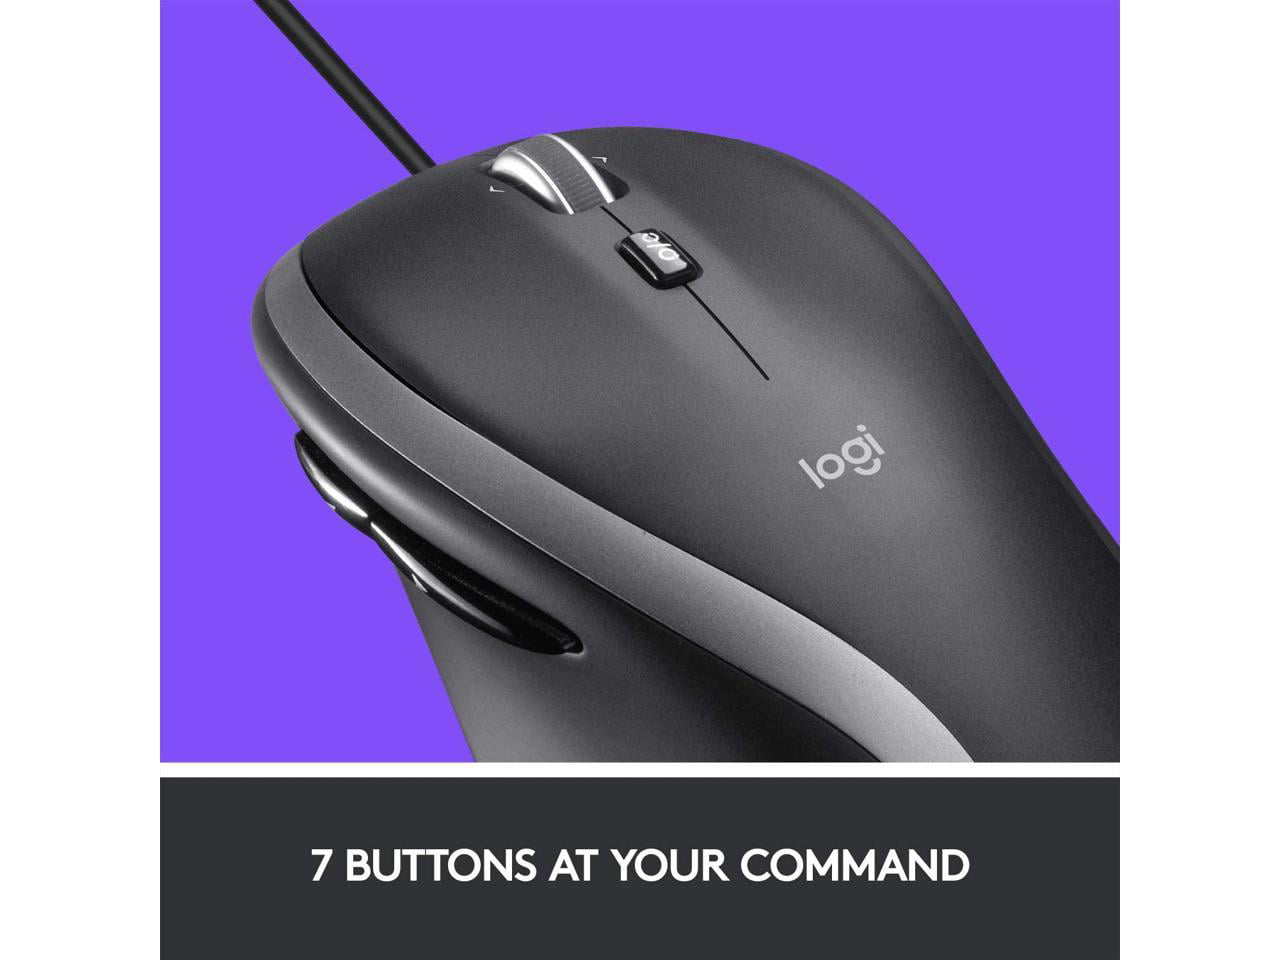 Logitech Corded Mouse with Advanced Hyper-fast Scrolling & Tilt, Customizable Buttons, High Precision Tracking with DPI Switch, USB plug - Walmart.com